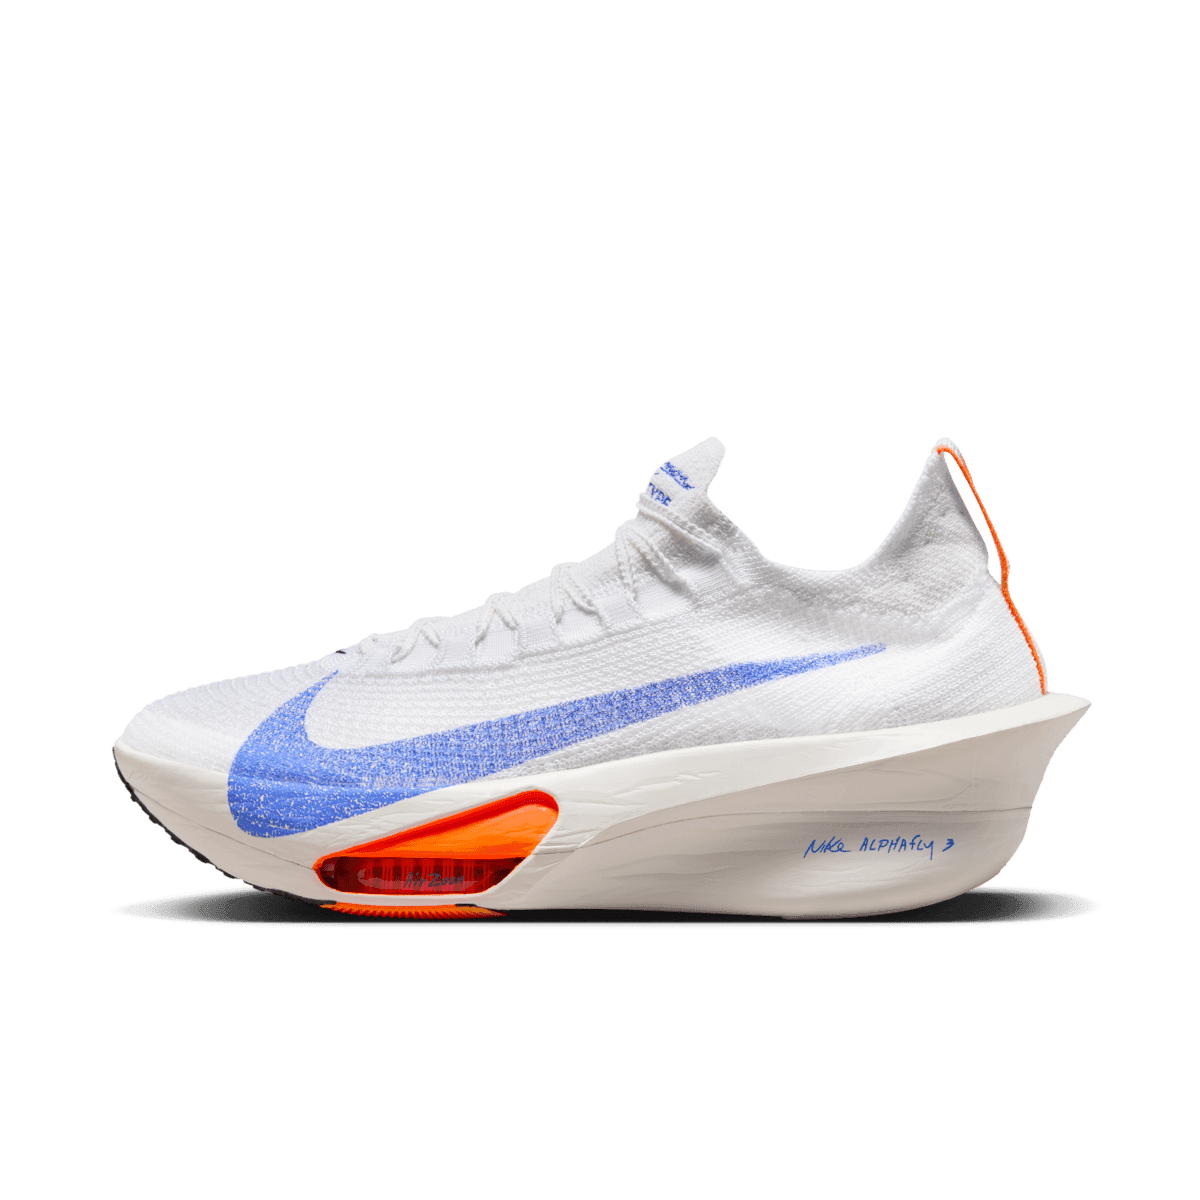 Nike Air Zoom Alphafly Next% 3 FP 'White' - Blueprint Pack